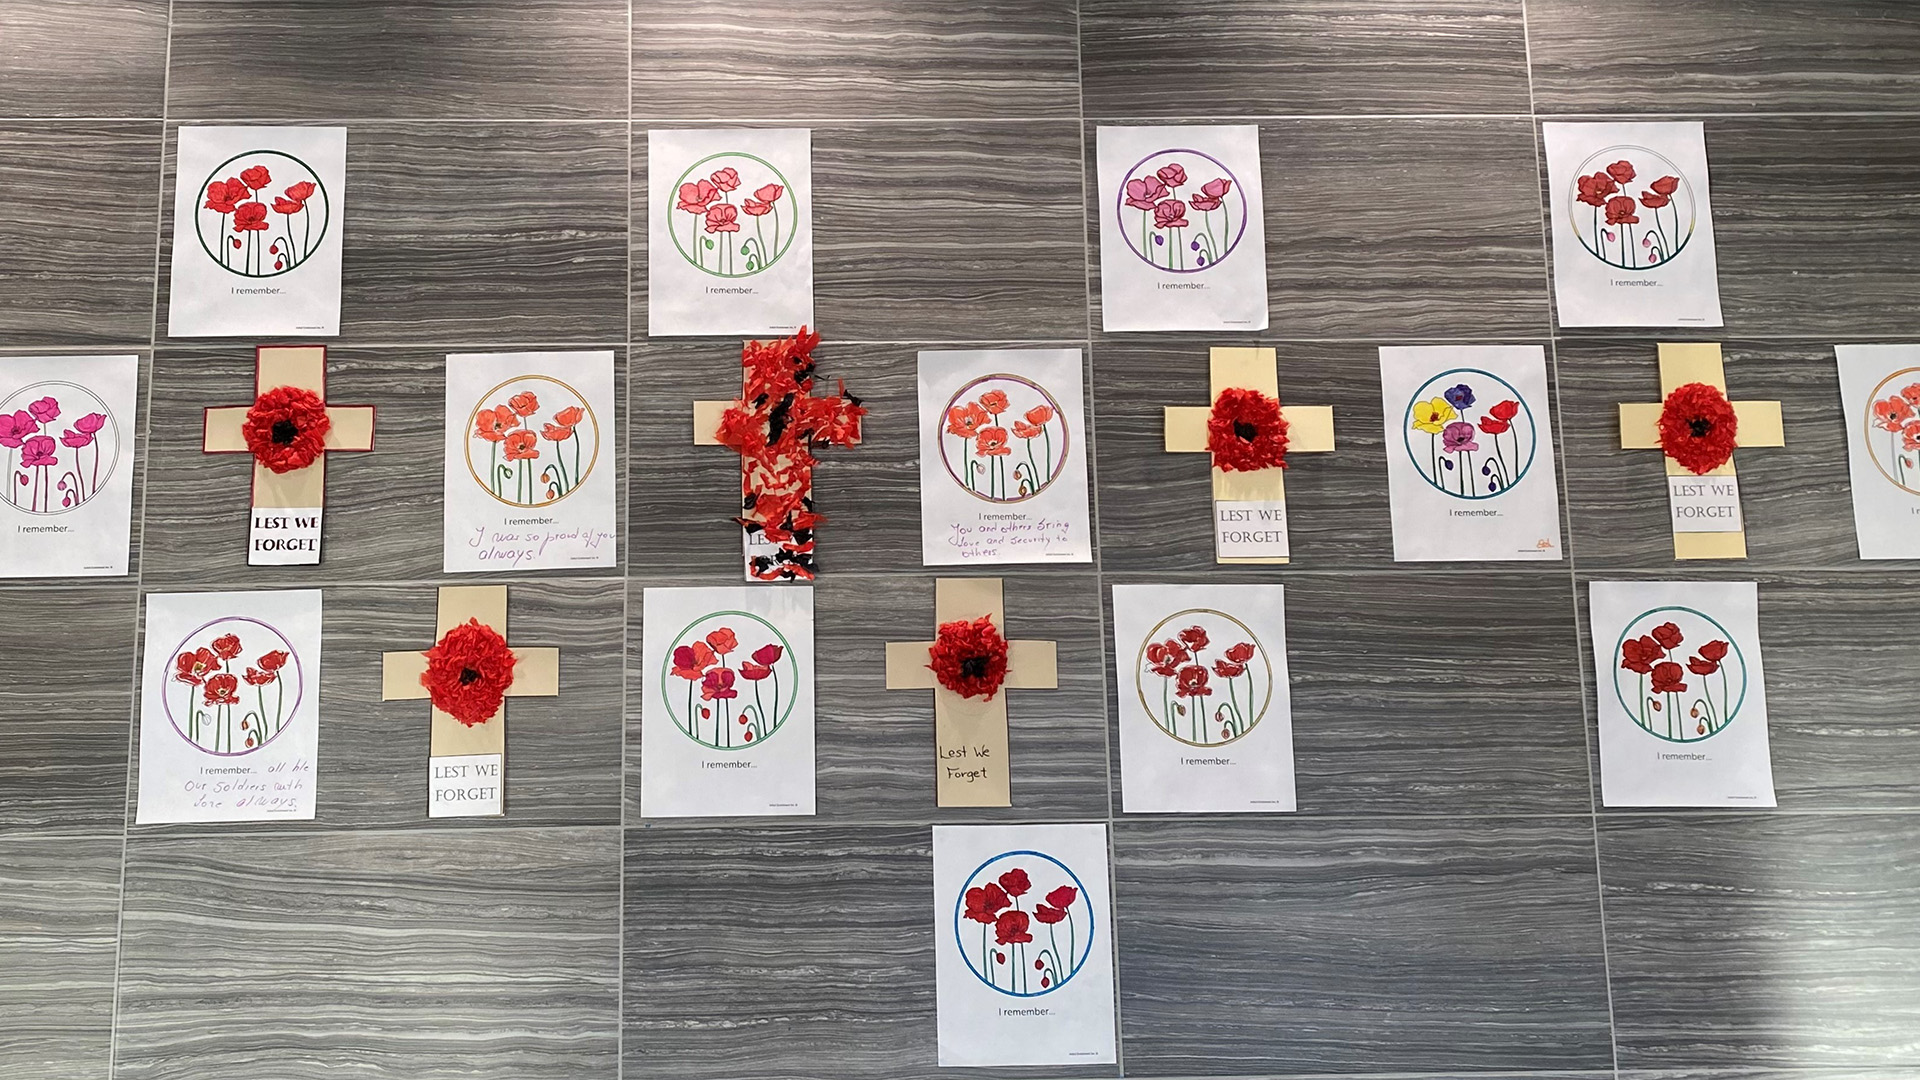 Remembrance Day art of crosses and coloured illustrations from residents.